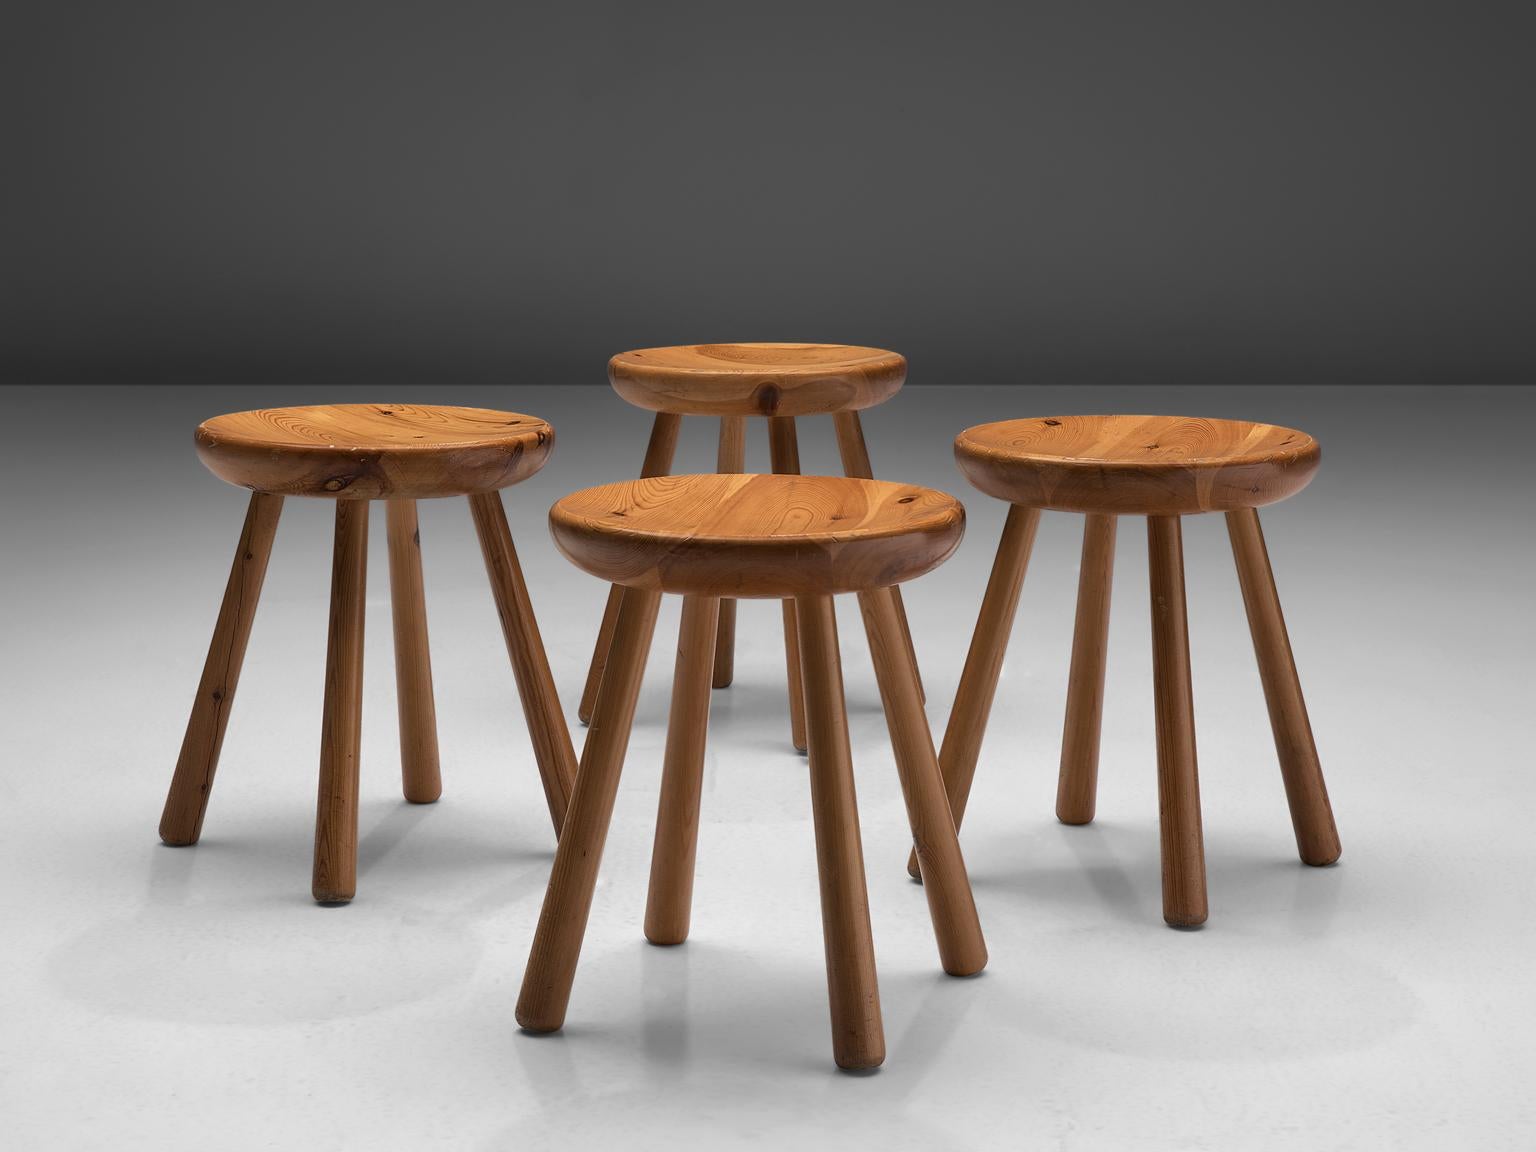 Stools, in pine, Europe, 1970s. 

Set of two stools in solid pine in different sizes. They are modest, raw and functional. A simplistic design which shows the nice and expressive grain of the pine wood. These chairs show great resemblance to the